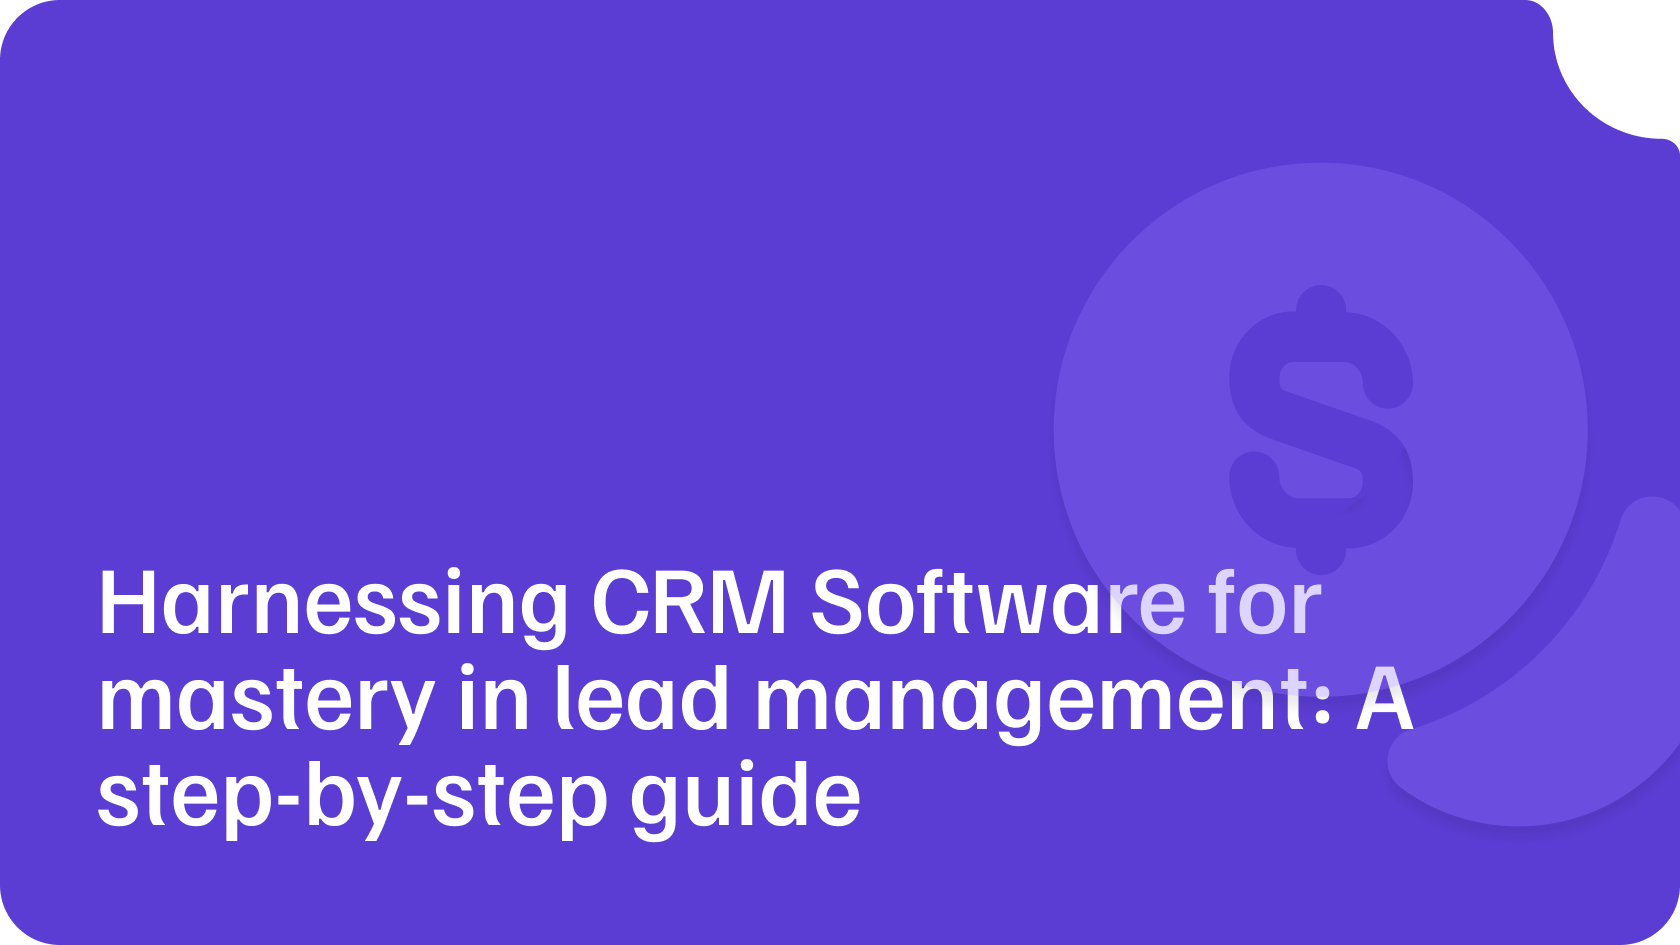 Harnessing CRM Software for mastery in lead management: A step-by-step guide